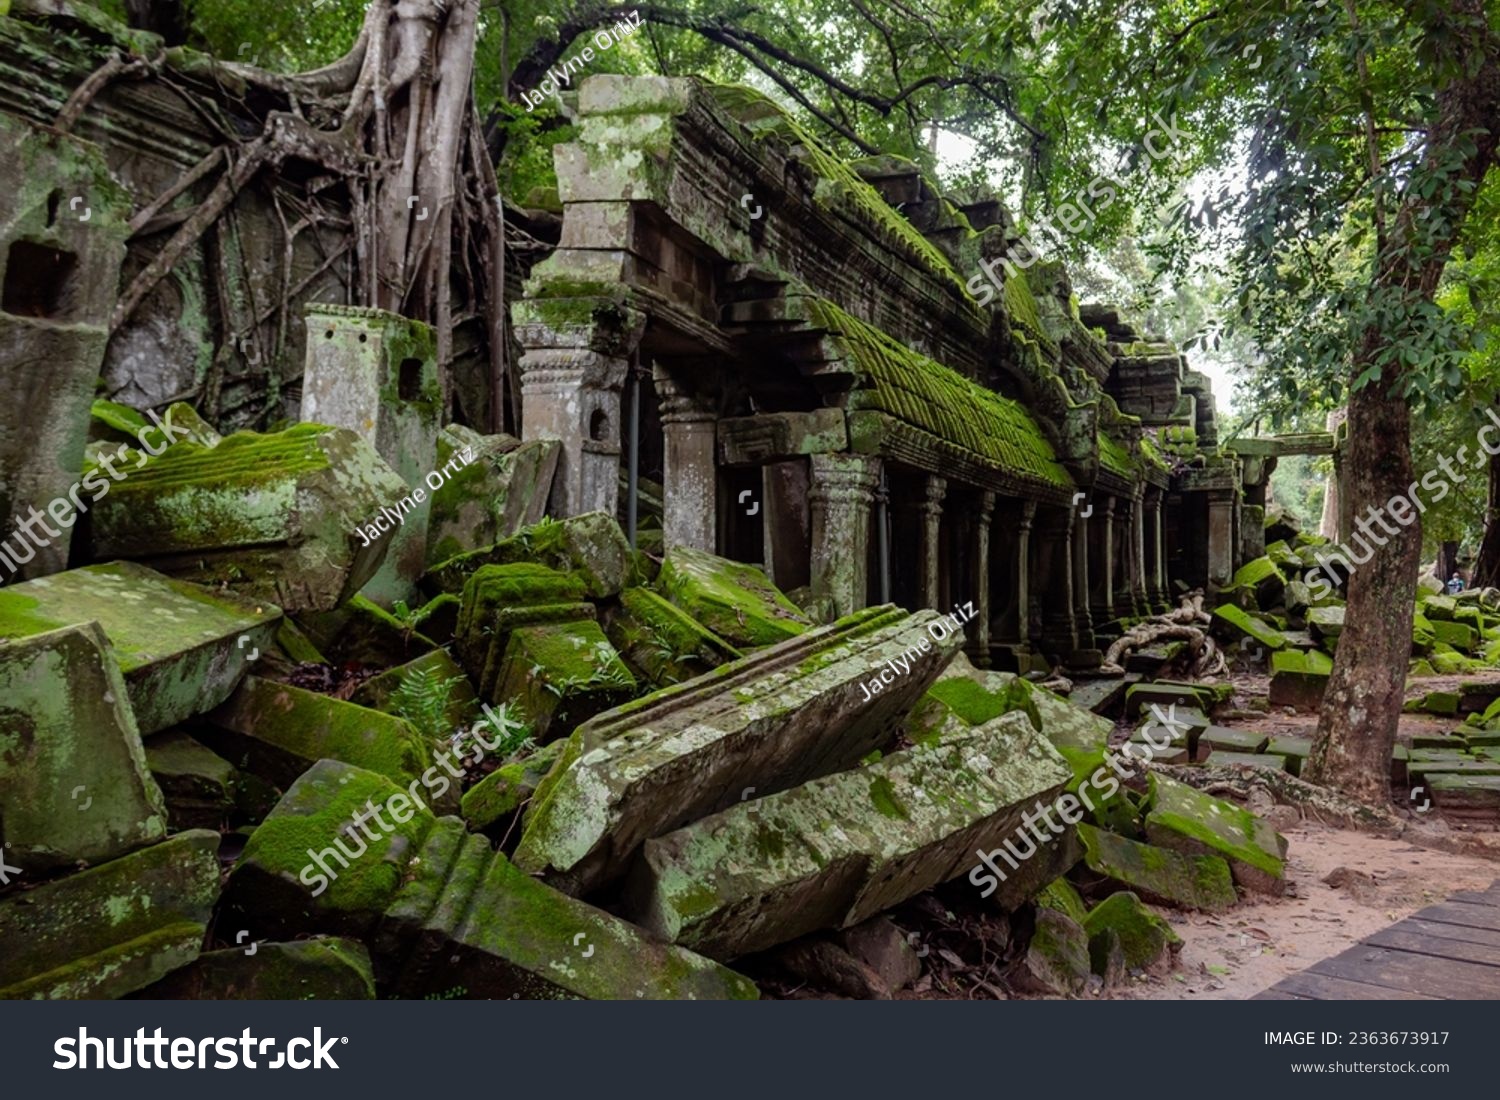 Green moss-covered stone brick building ruins at Ta Prohm Tomb Raider temple complex. Angkor Wat historical site, Siem Reap, Cambodia #2363673917